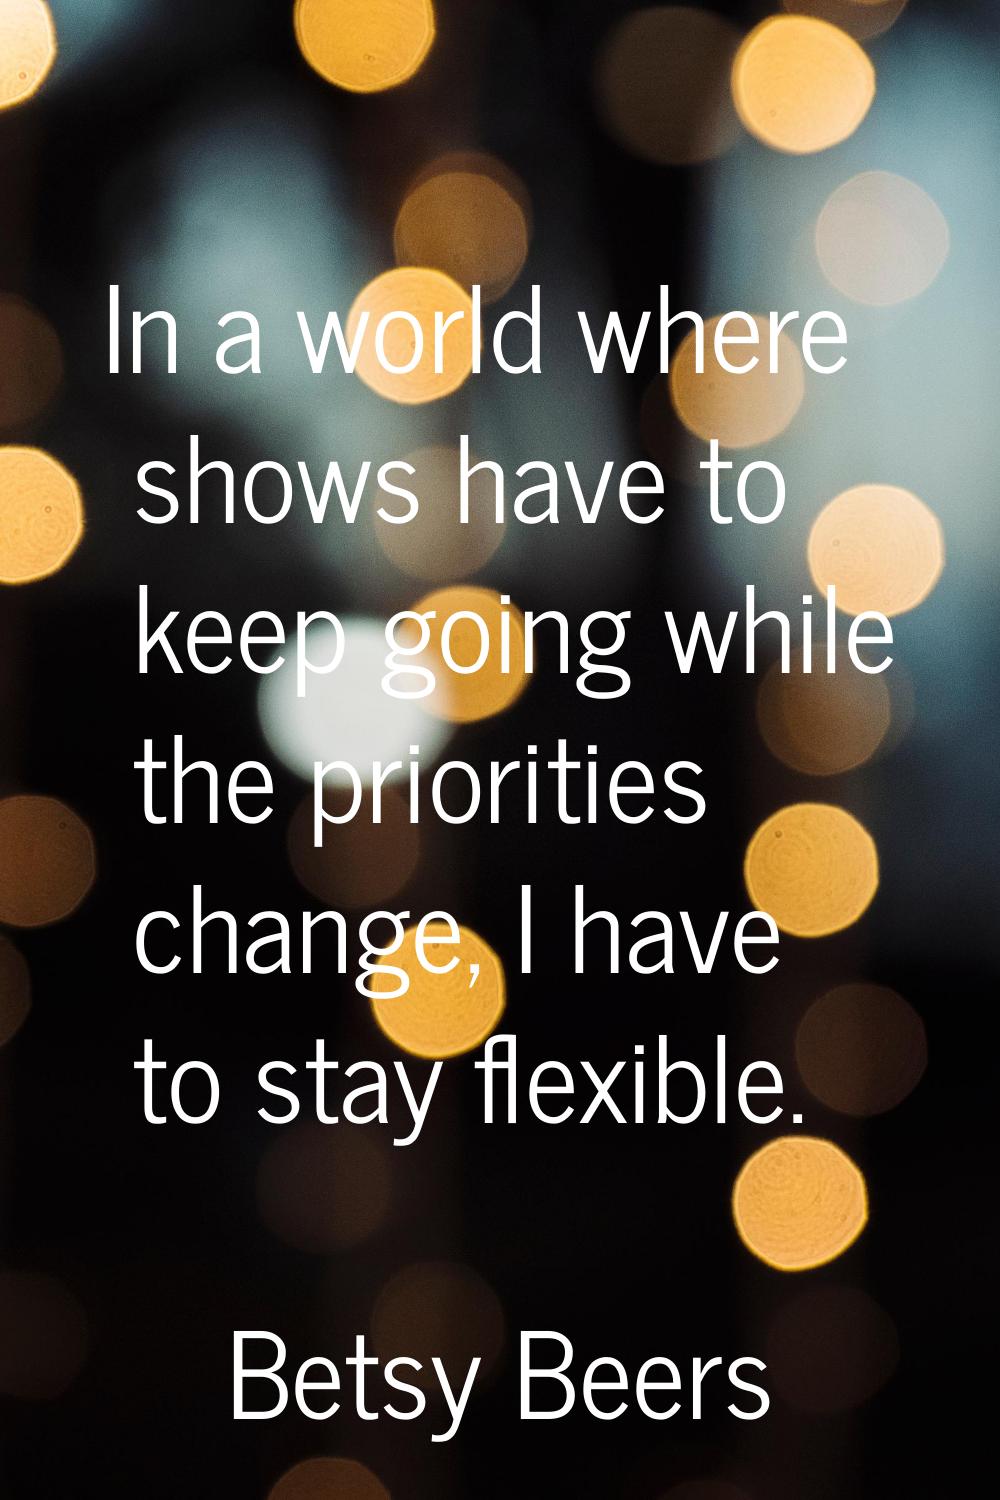 In a world where shows have to keep going while the priorities change, I have to stay flexible.